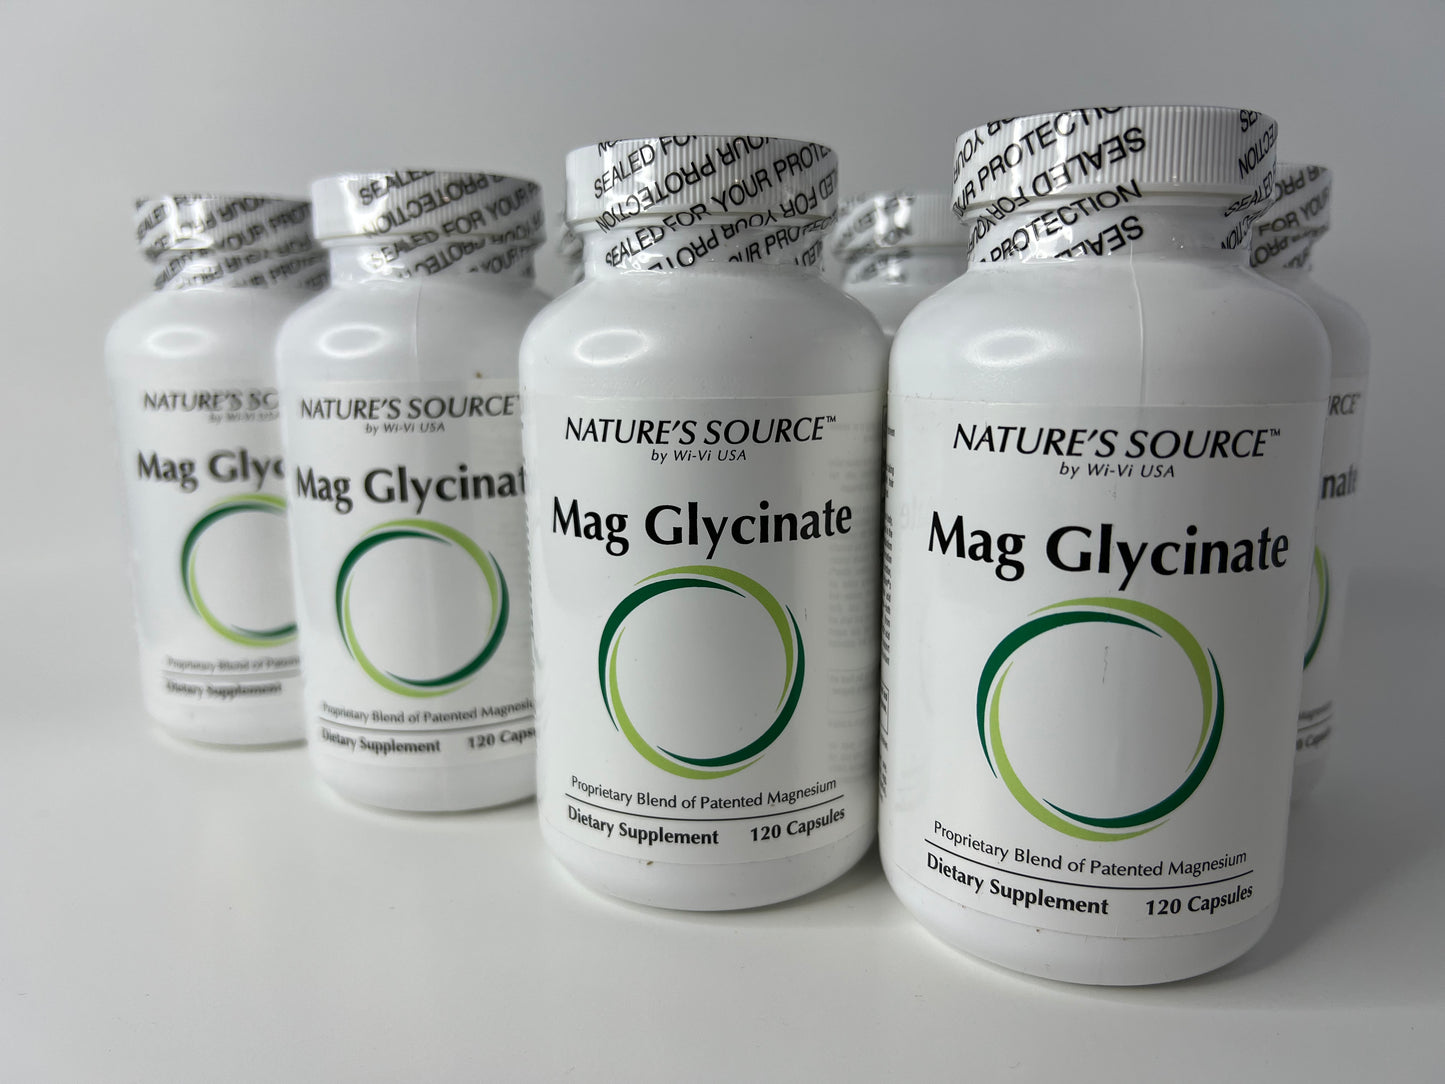 Mag Glycinate - Proprietary Blend of Patented Magnesium by:Nature's Source